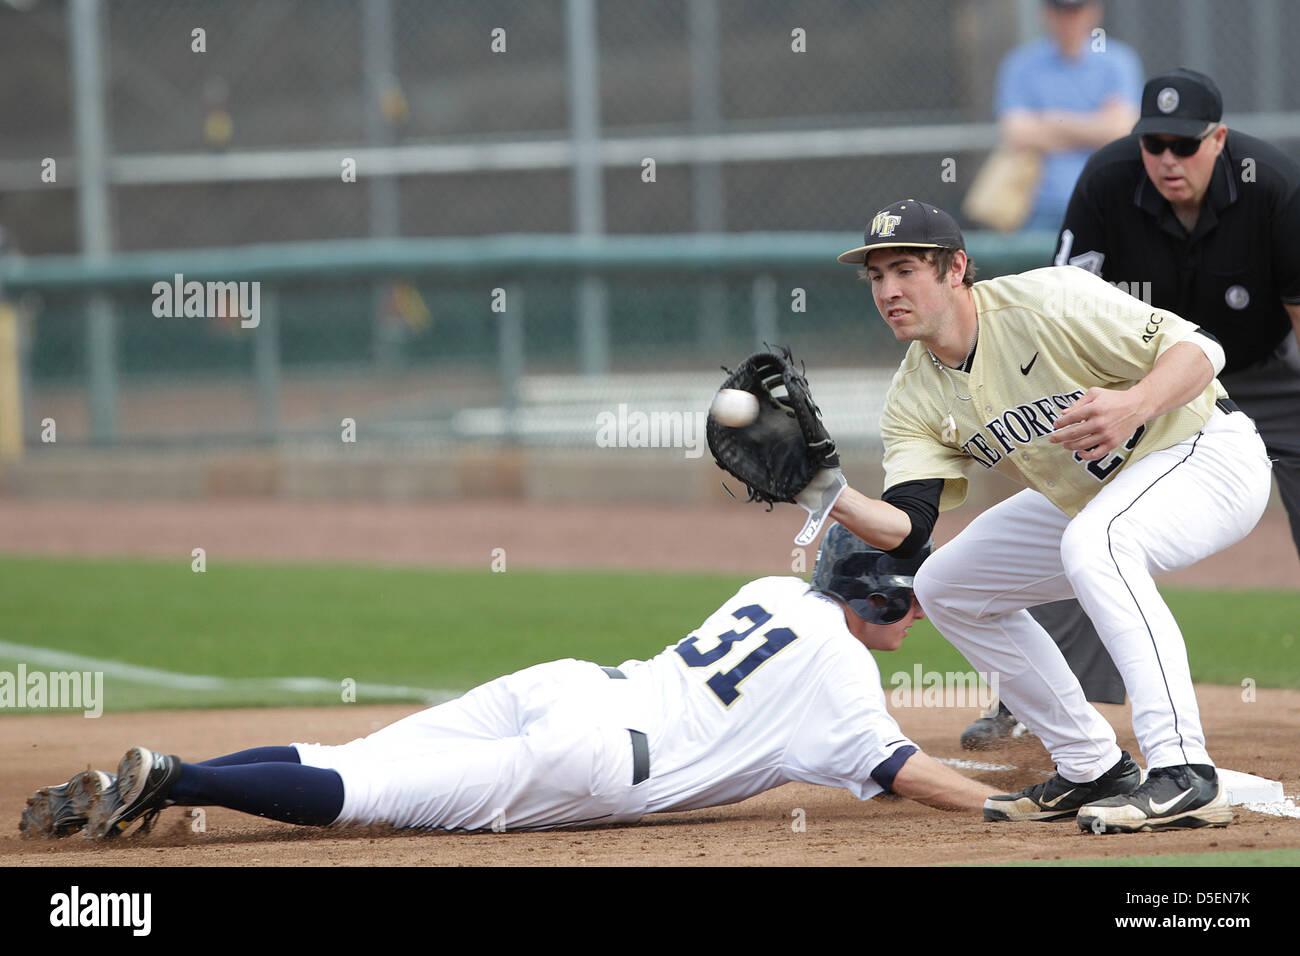 Atlanta, Georgia, USA. 30th March, 2013. The Georgia Tech Yellow Jackets wrapped up a 3-game series with a double header against the the Wake Forest Demon Deacons at Russ Chandler Stadium in Atlanta Georgia. Georgia Tech 3rd baseman Sam Dove (31) dives back to 1st before the throw to Matt Conway (25). The Yellow Jackets dropped the second game to Wake Forest 8-6. Stock Photo